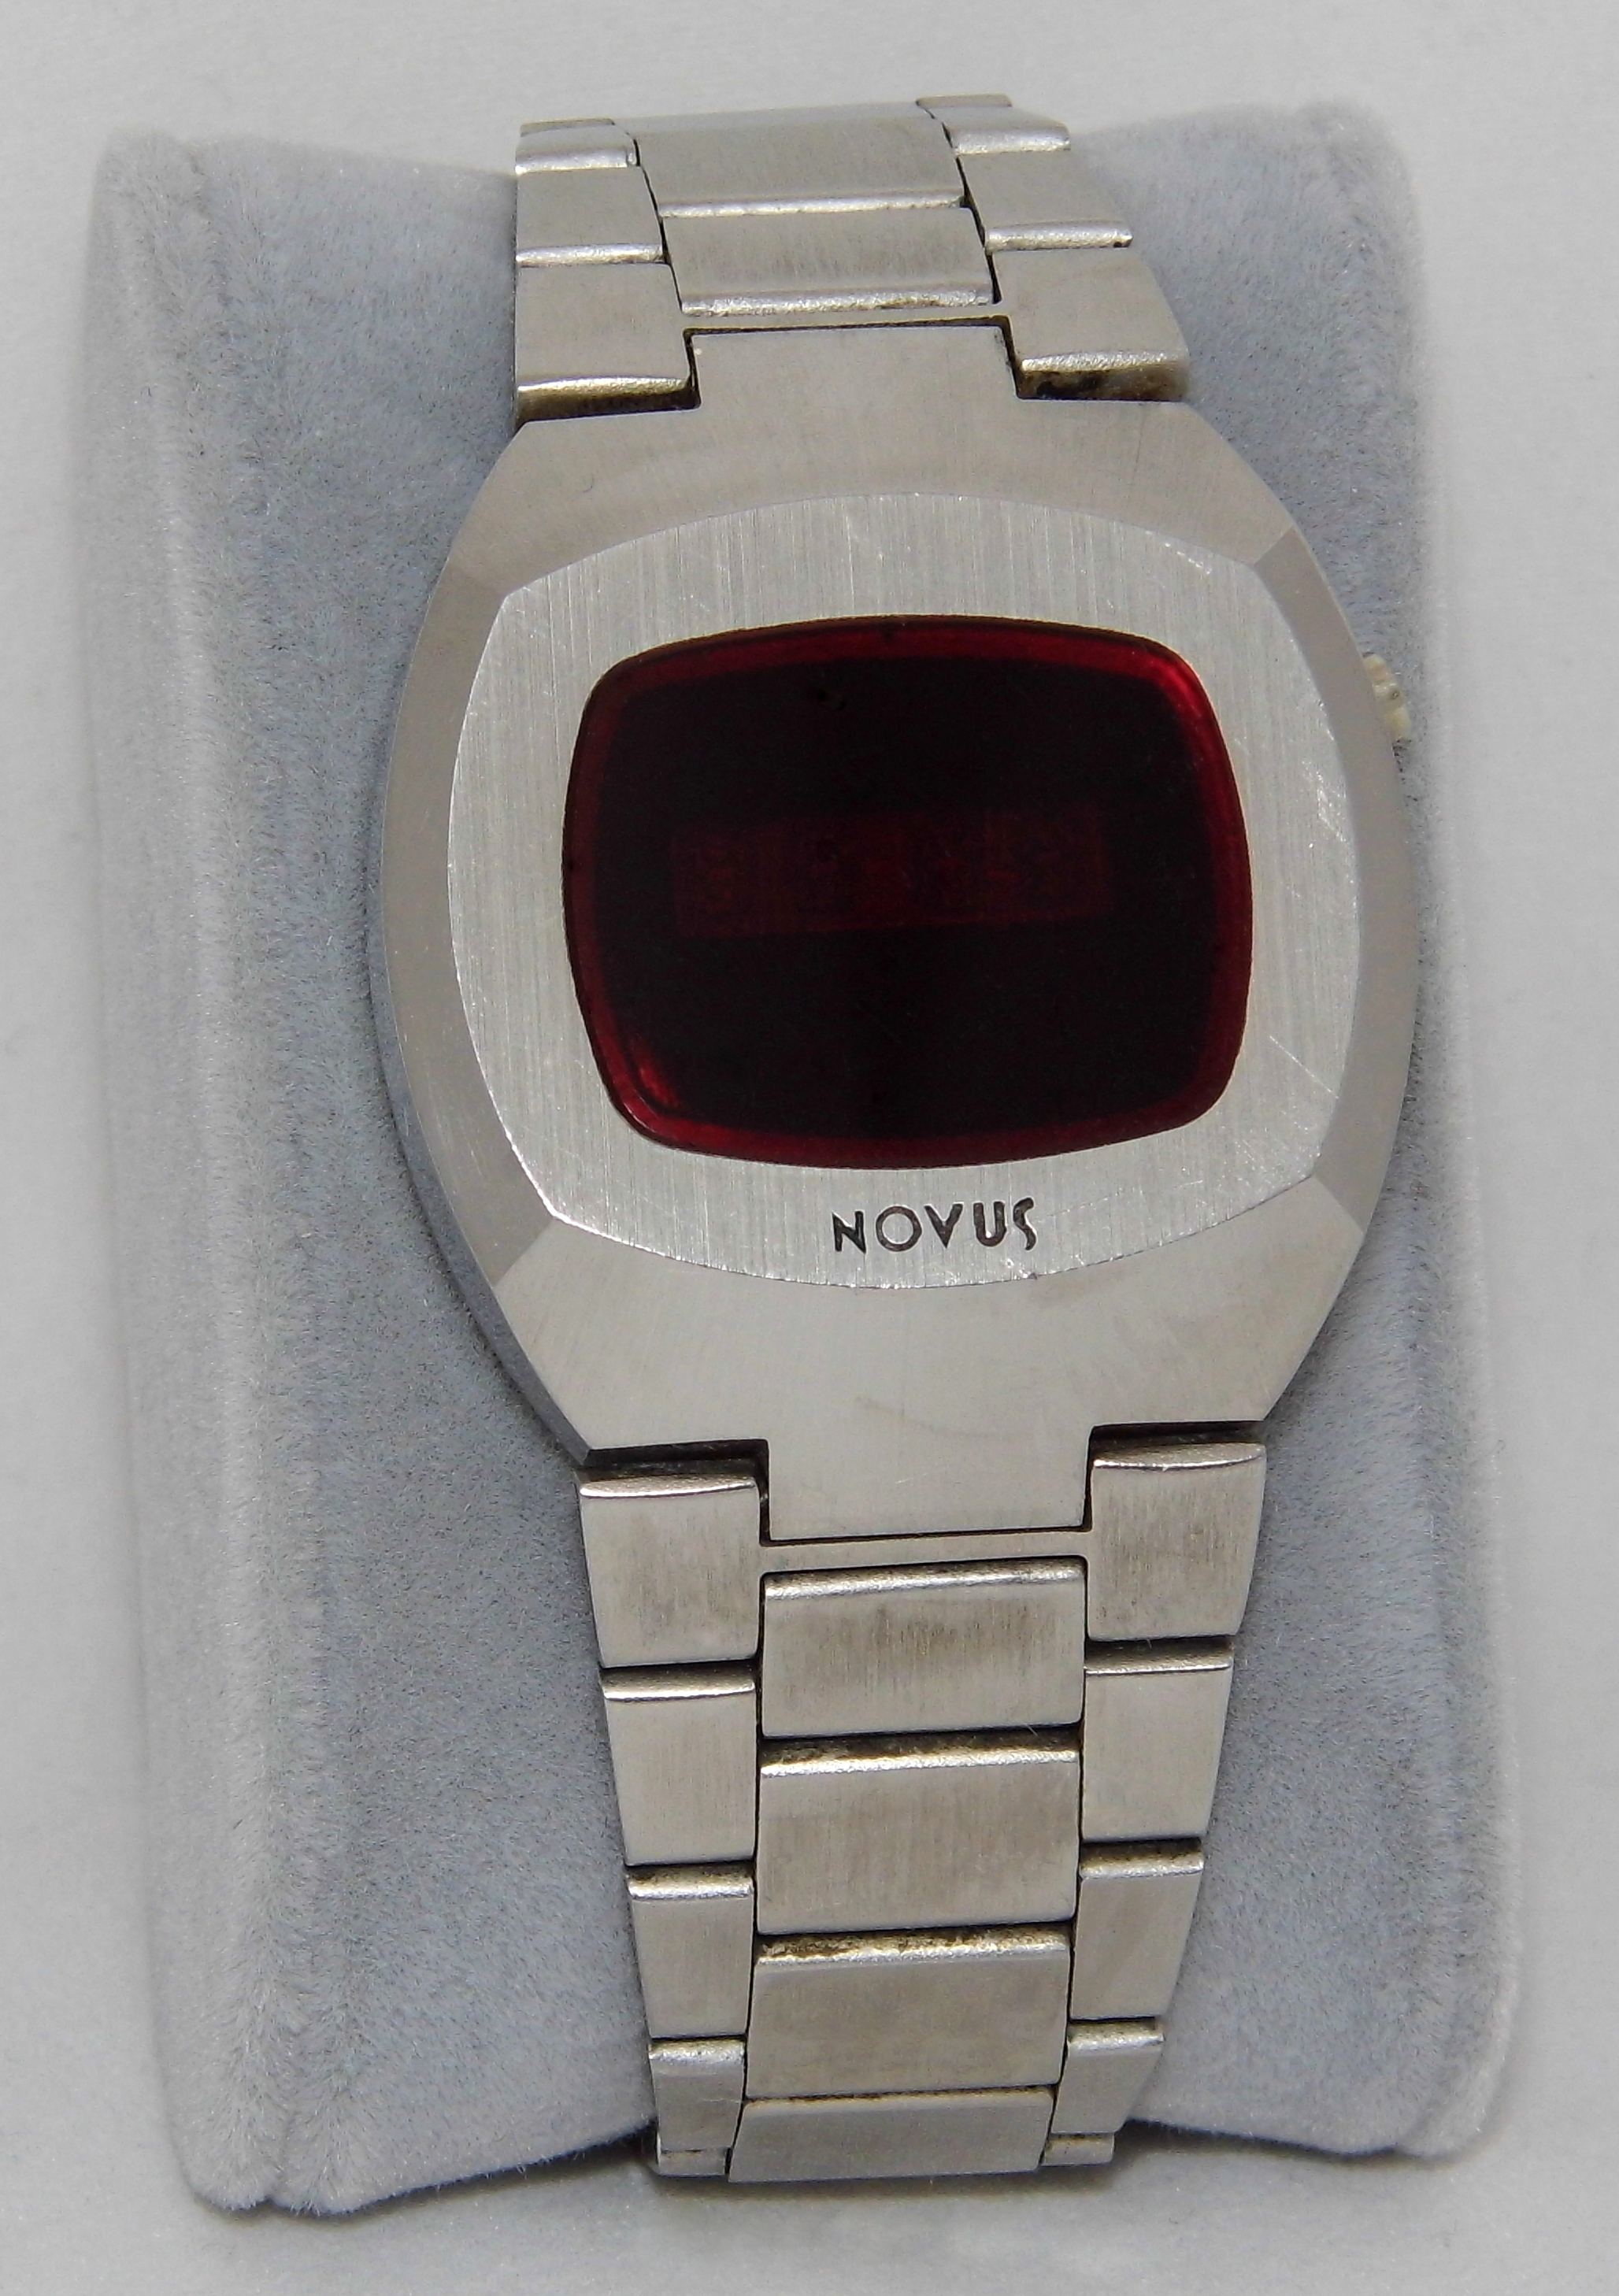 Fæstning Meningsløs ret File:Vintage Novus (Consumer Division Of The National Semiconductor  Corporation) Men's Electronic Quartz Wrist Watch With Red LED Display,  Original Band, Circa 1970s (26987568032).jpg - Wikimedia Commons